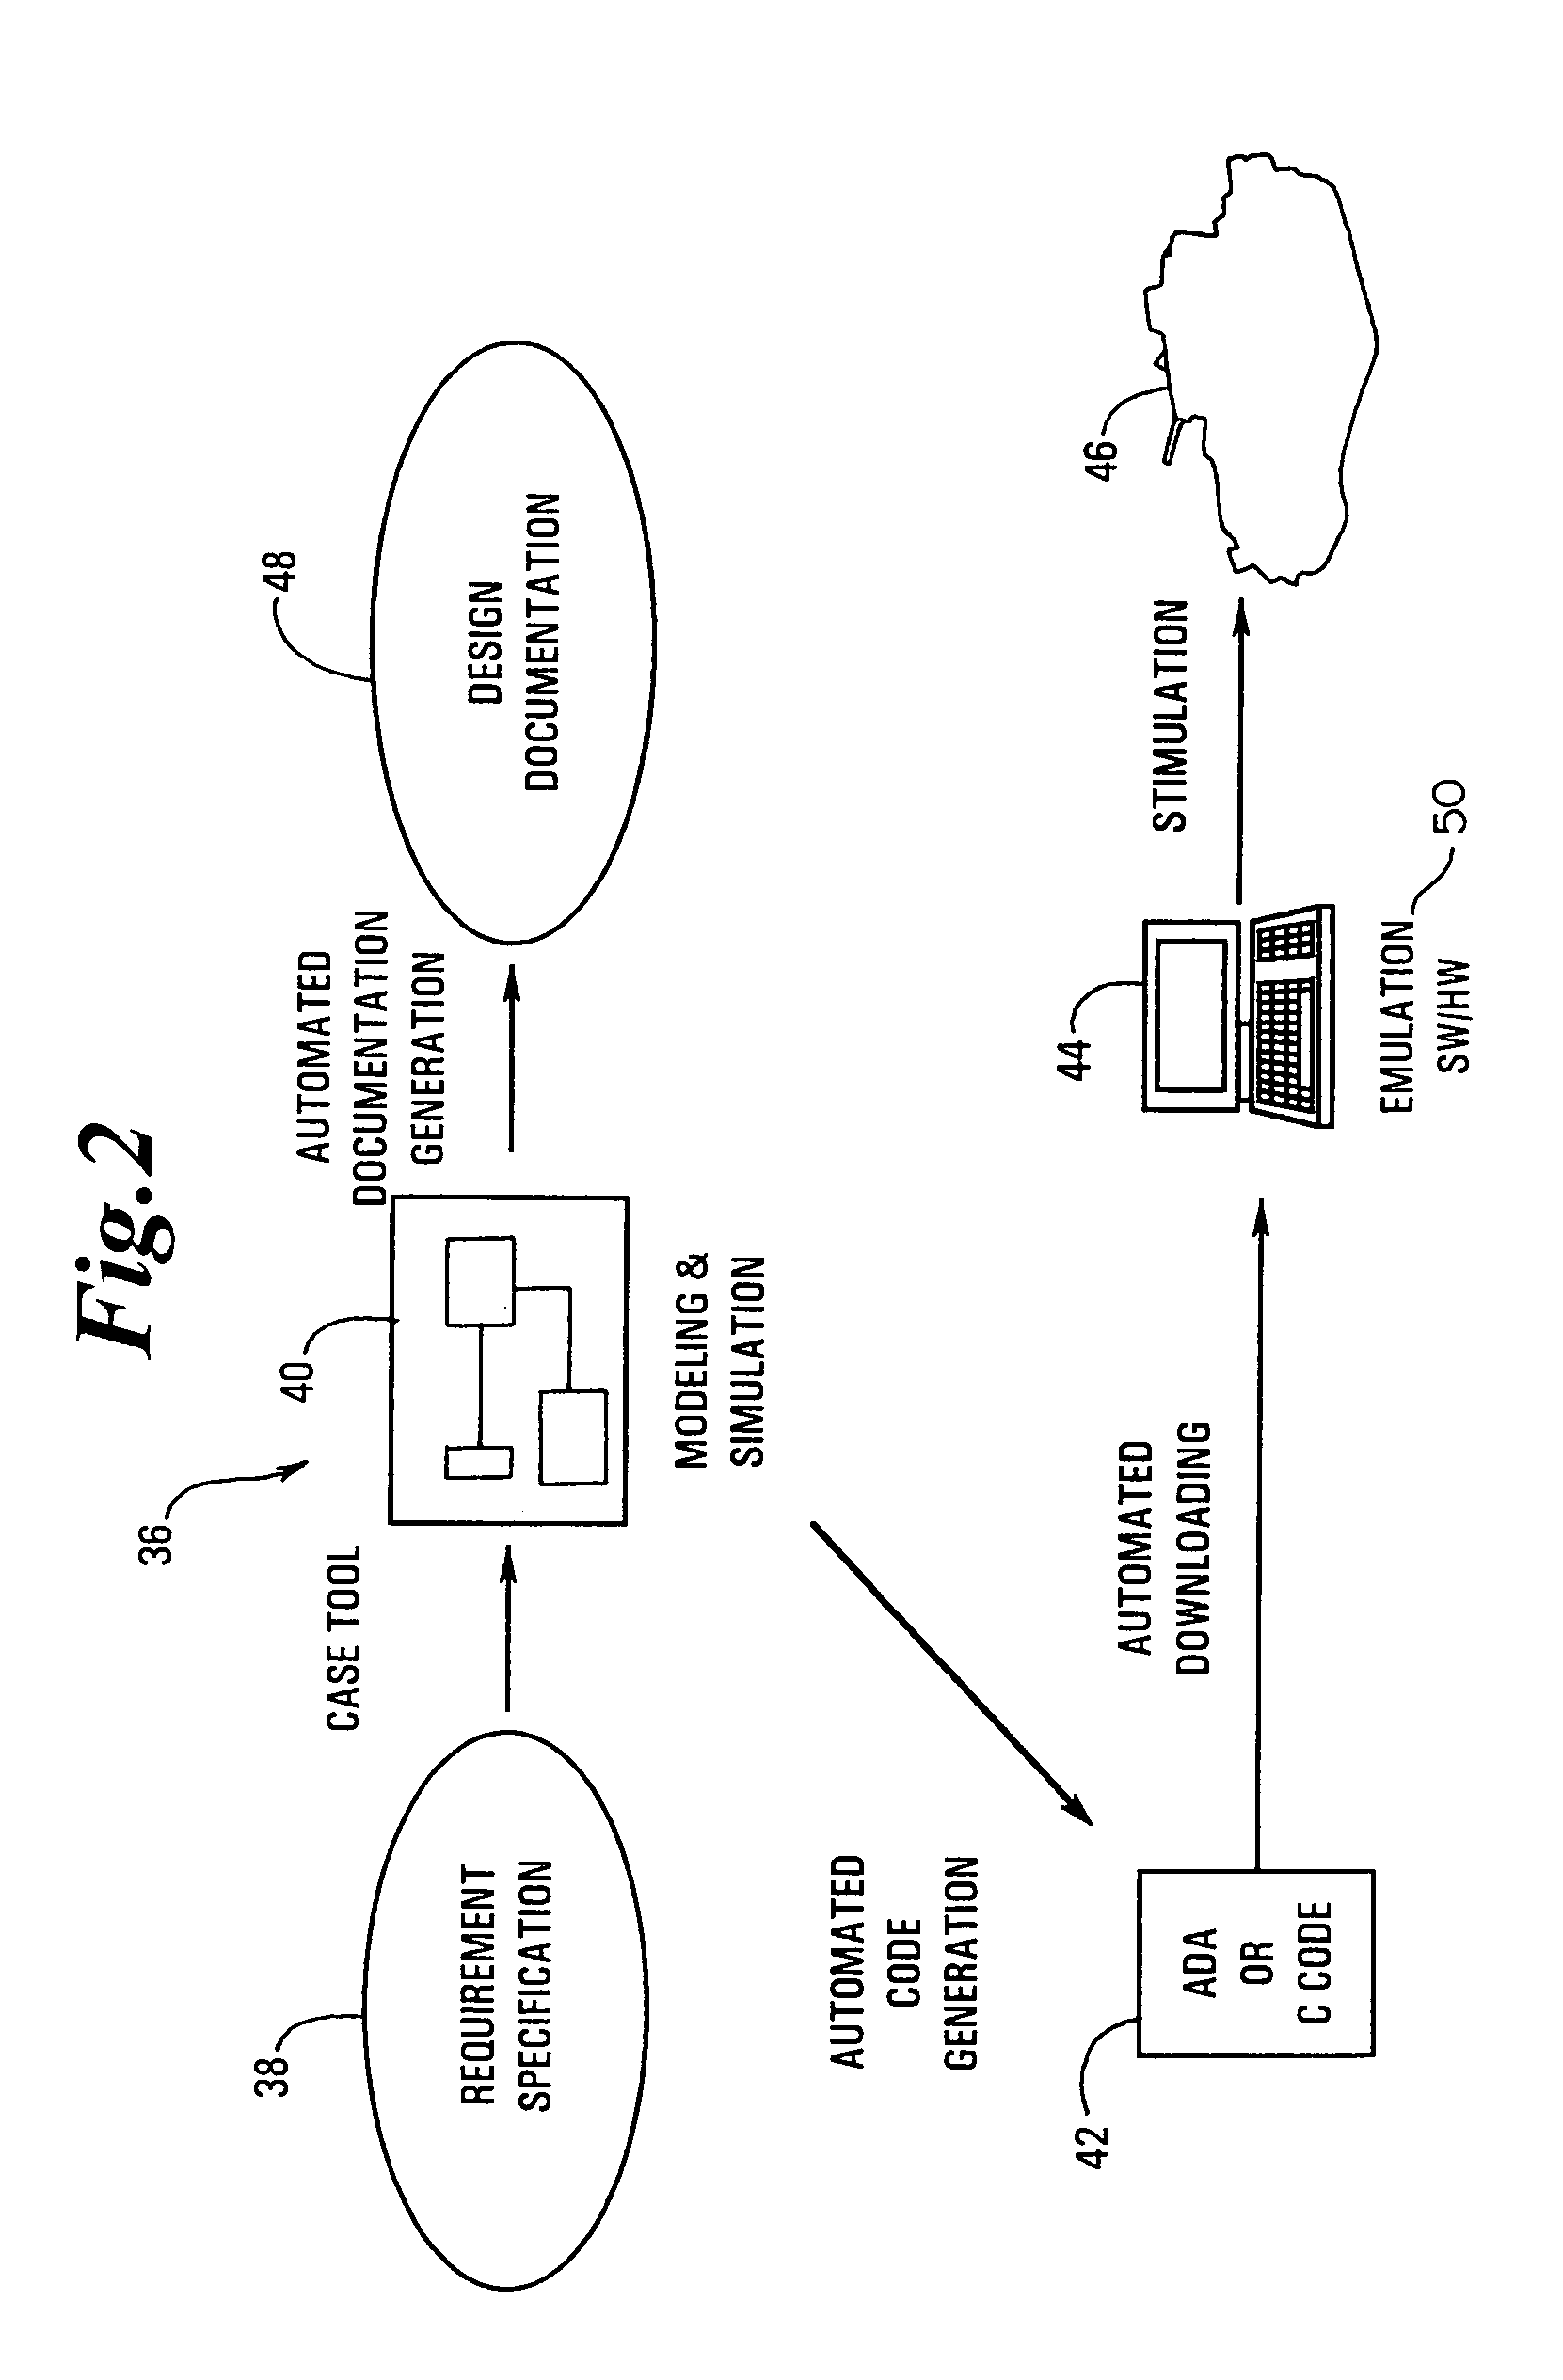 Control system architecture for a multi-component armament system